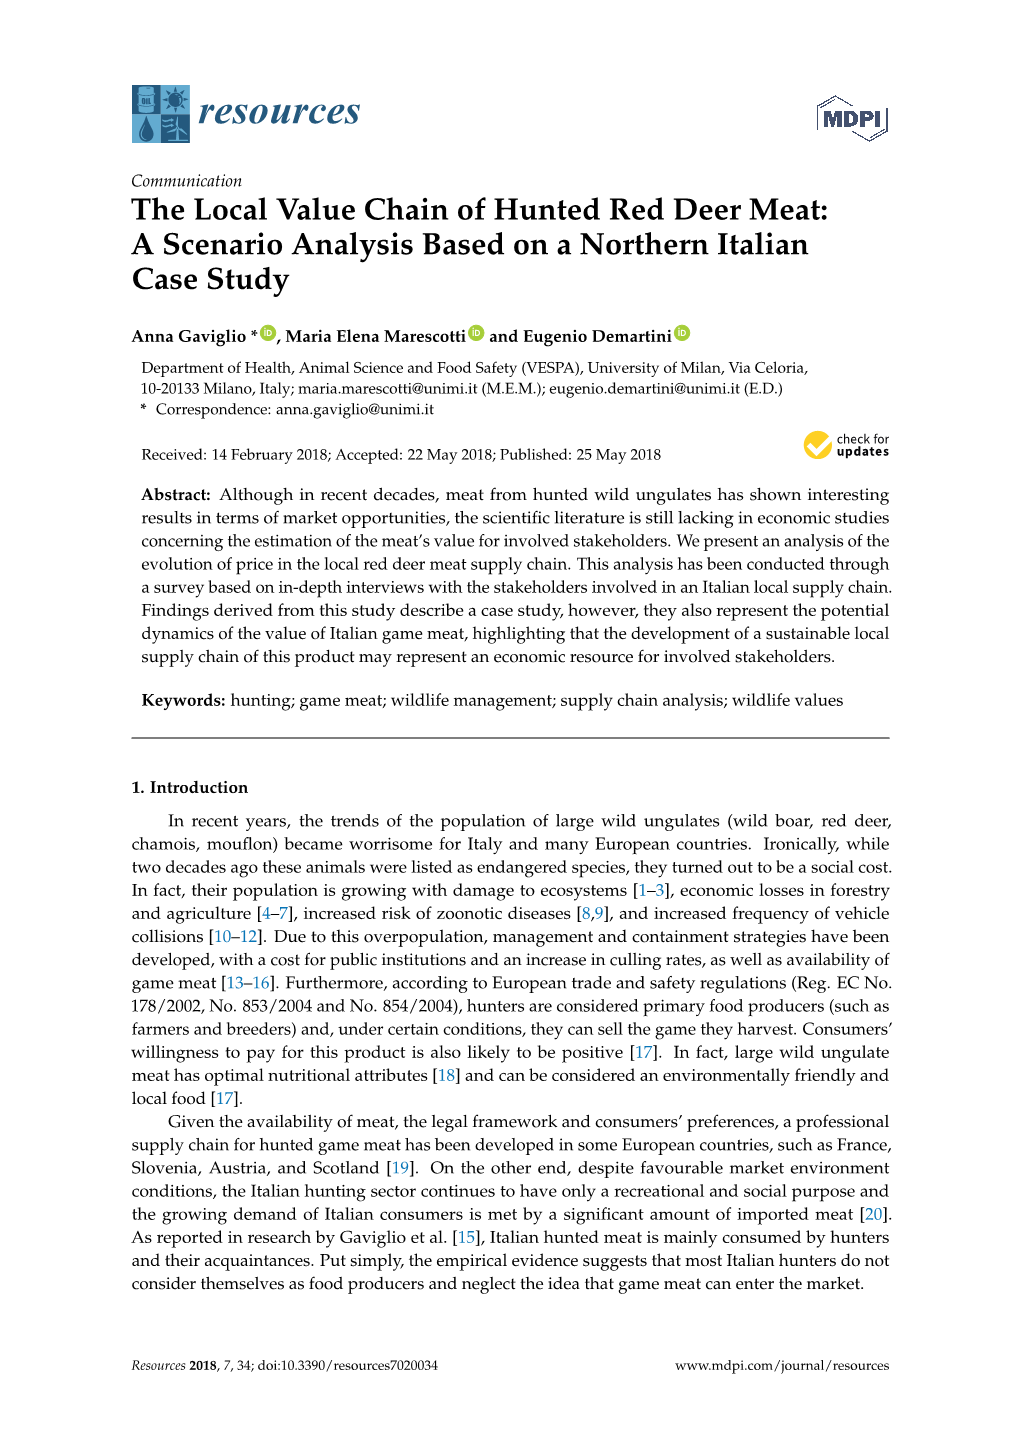 The Local Value Chain of Hunted Red Deer Meat: a Scenario Analysis Based on a Northern Italian Case Study